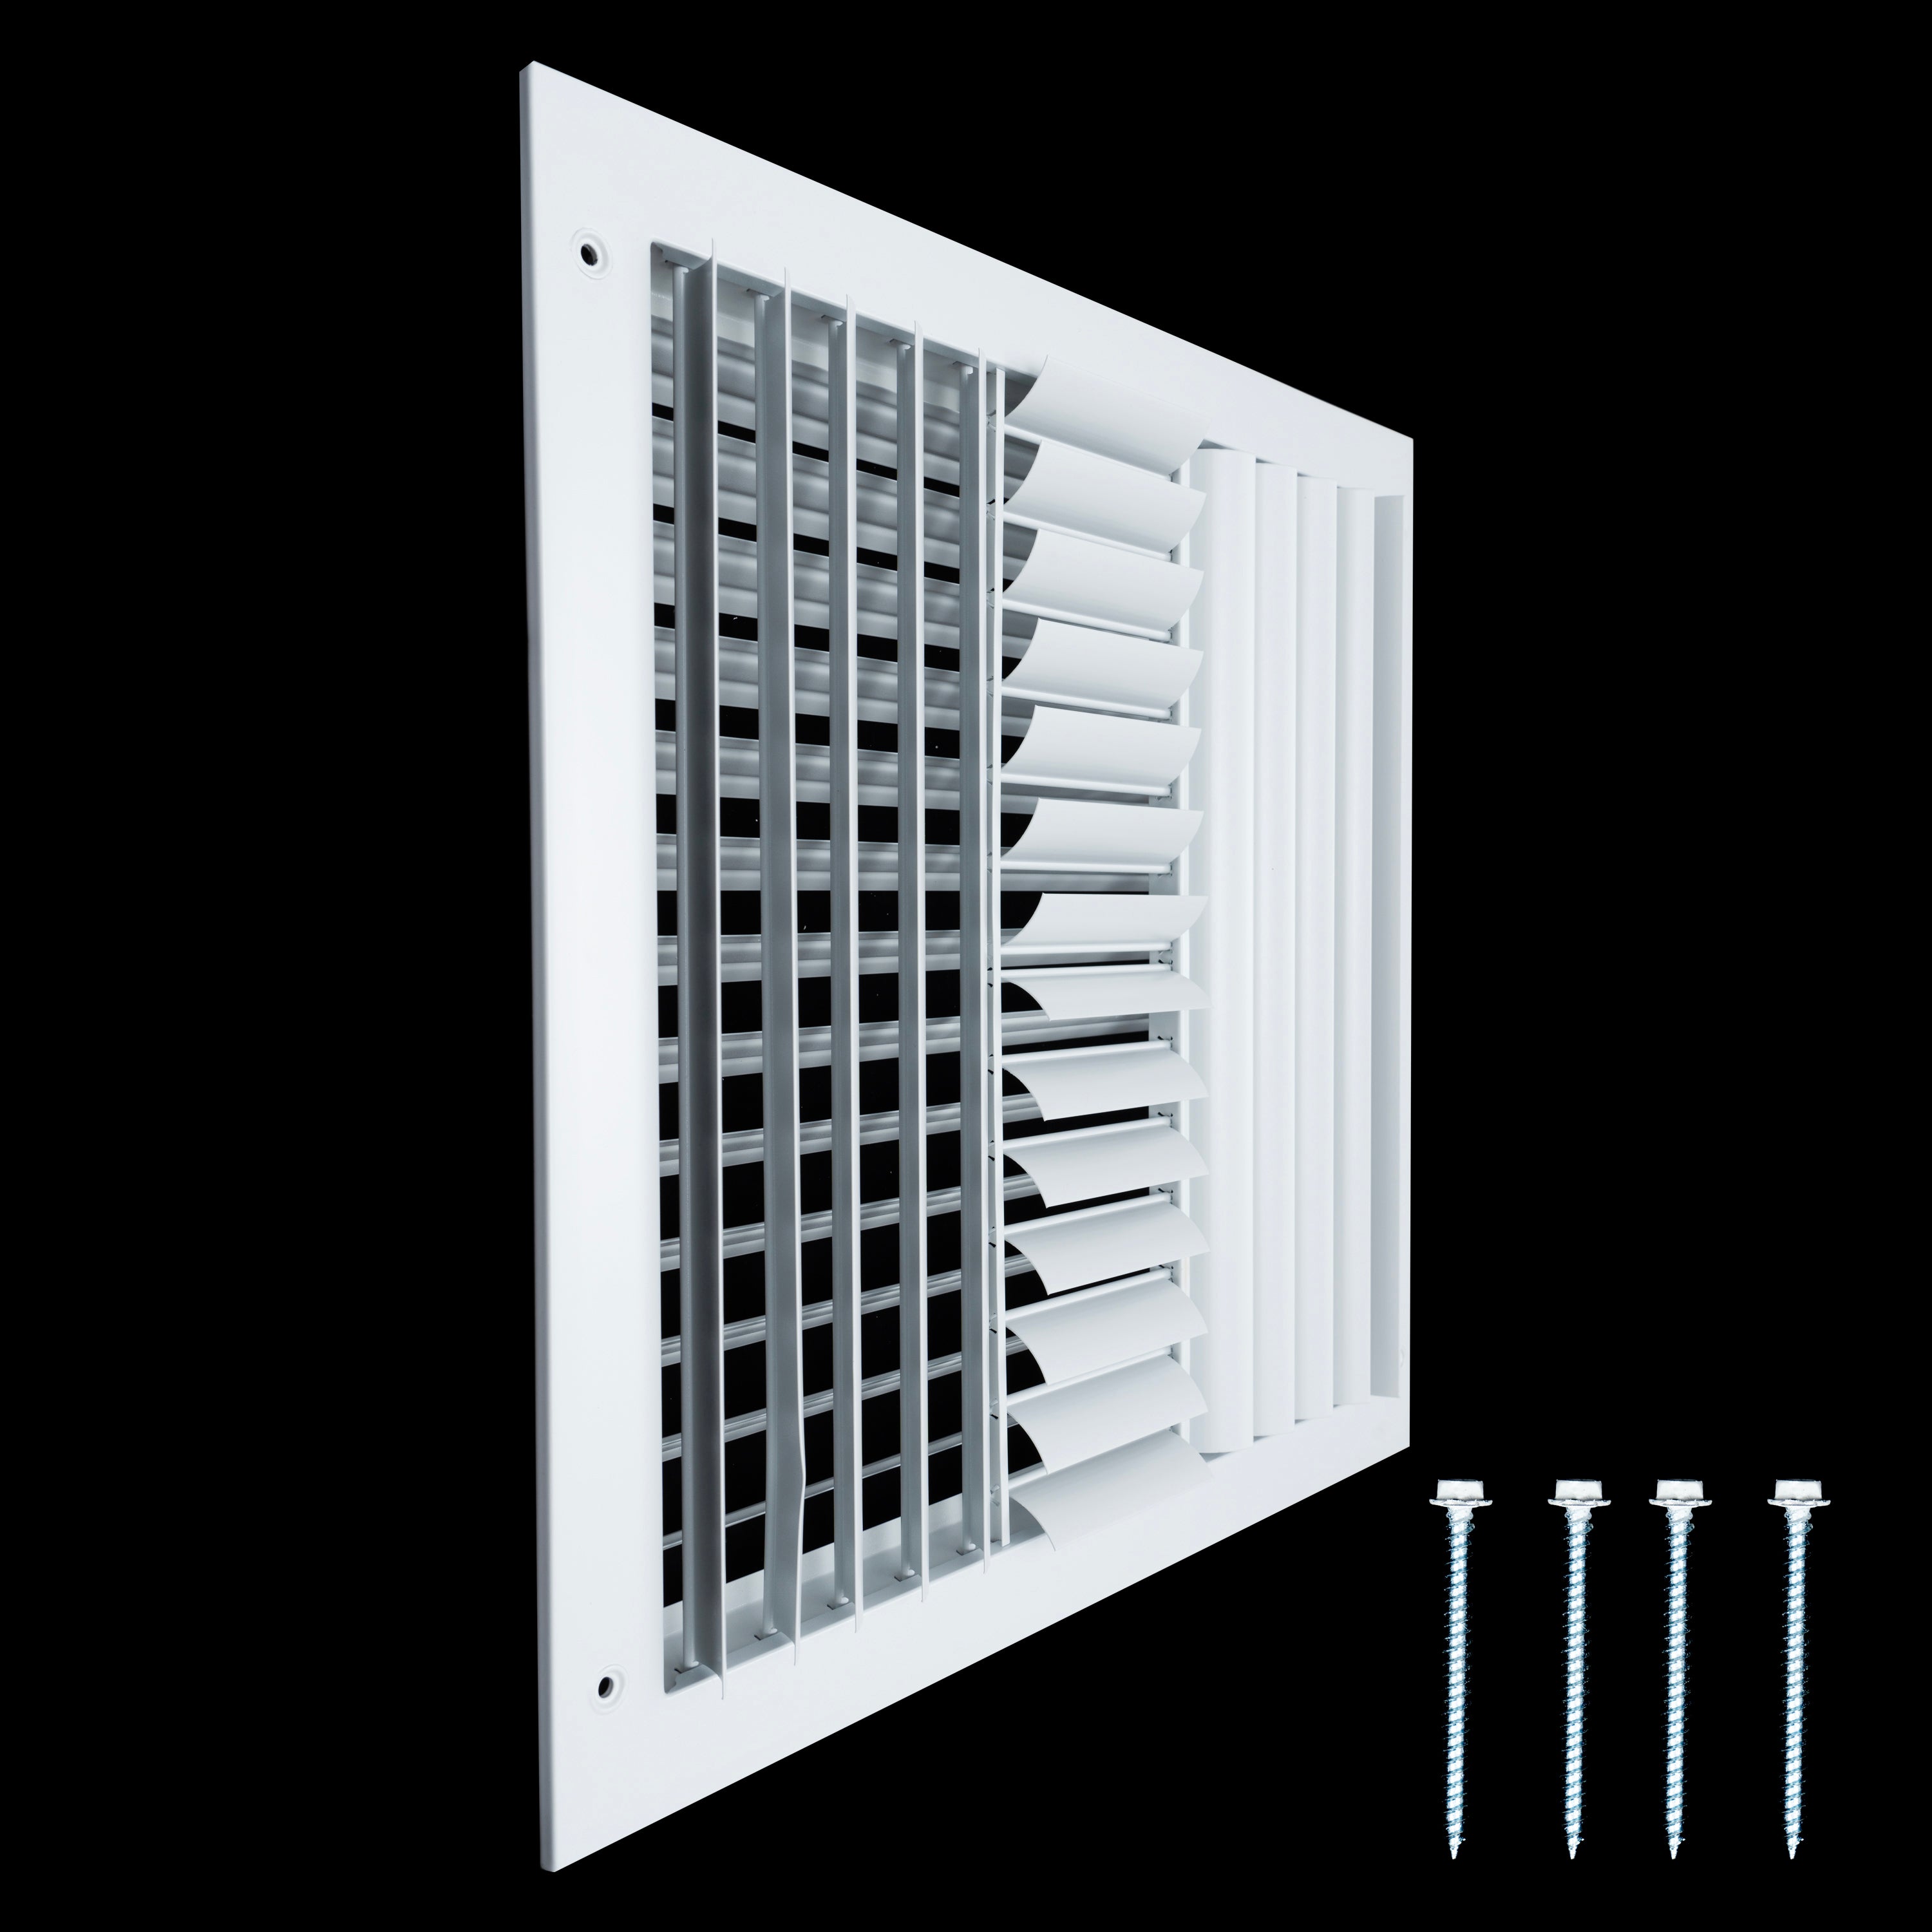 14"W x 14"H [Duct Opening] Aluminum 4-WAY Adjustable Air Supply Grille | Register Vent Cover Grill for Sidewall and Ceiling | White | Outer Dimensions: 15.75"W x 15.75"